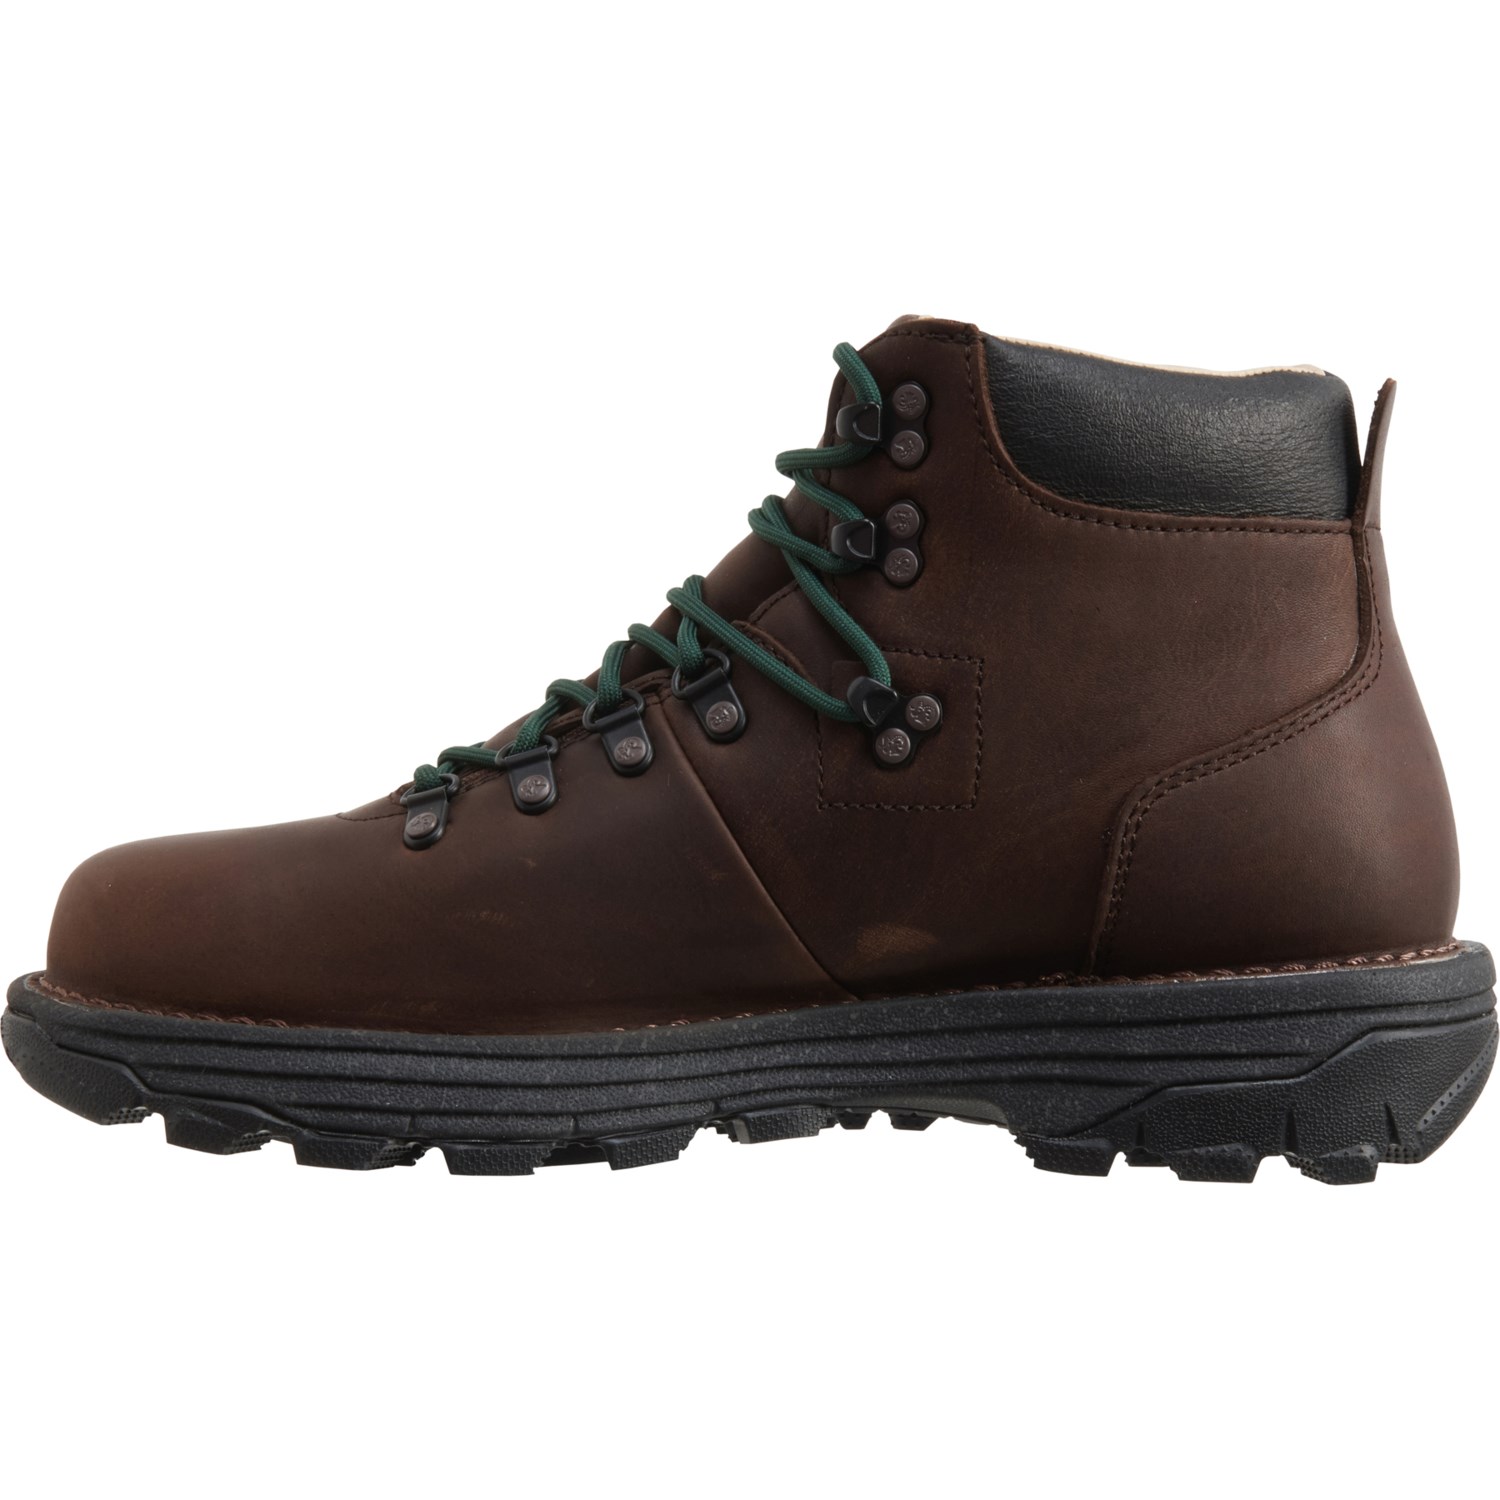 Rocky Rampage Hiking Boots (For Men) - Save 50%